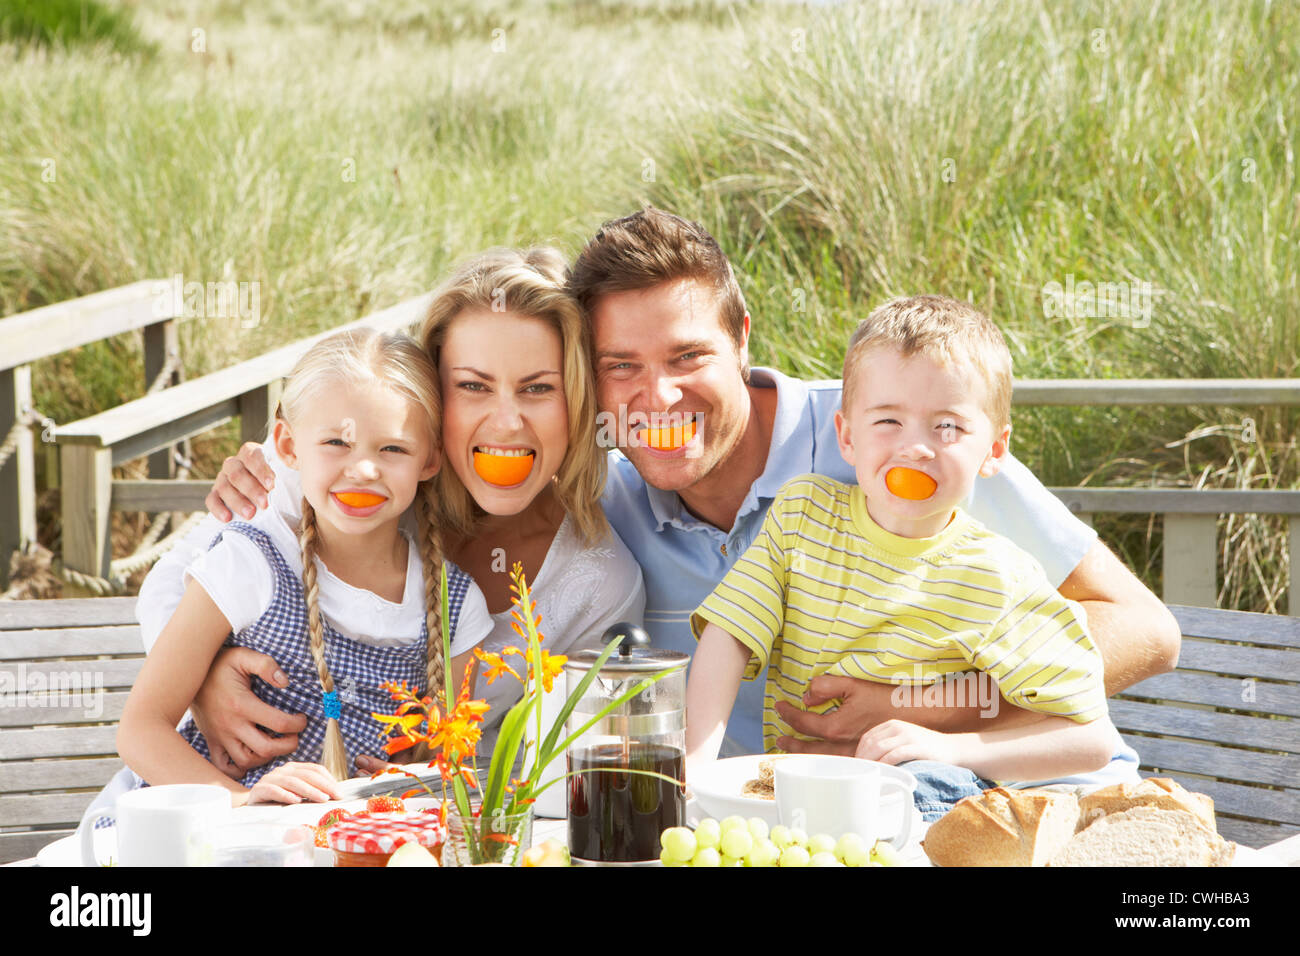 Family on vacation eating outdoors Stock Photo